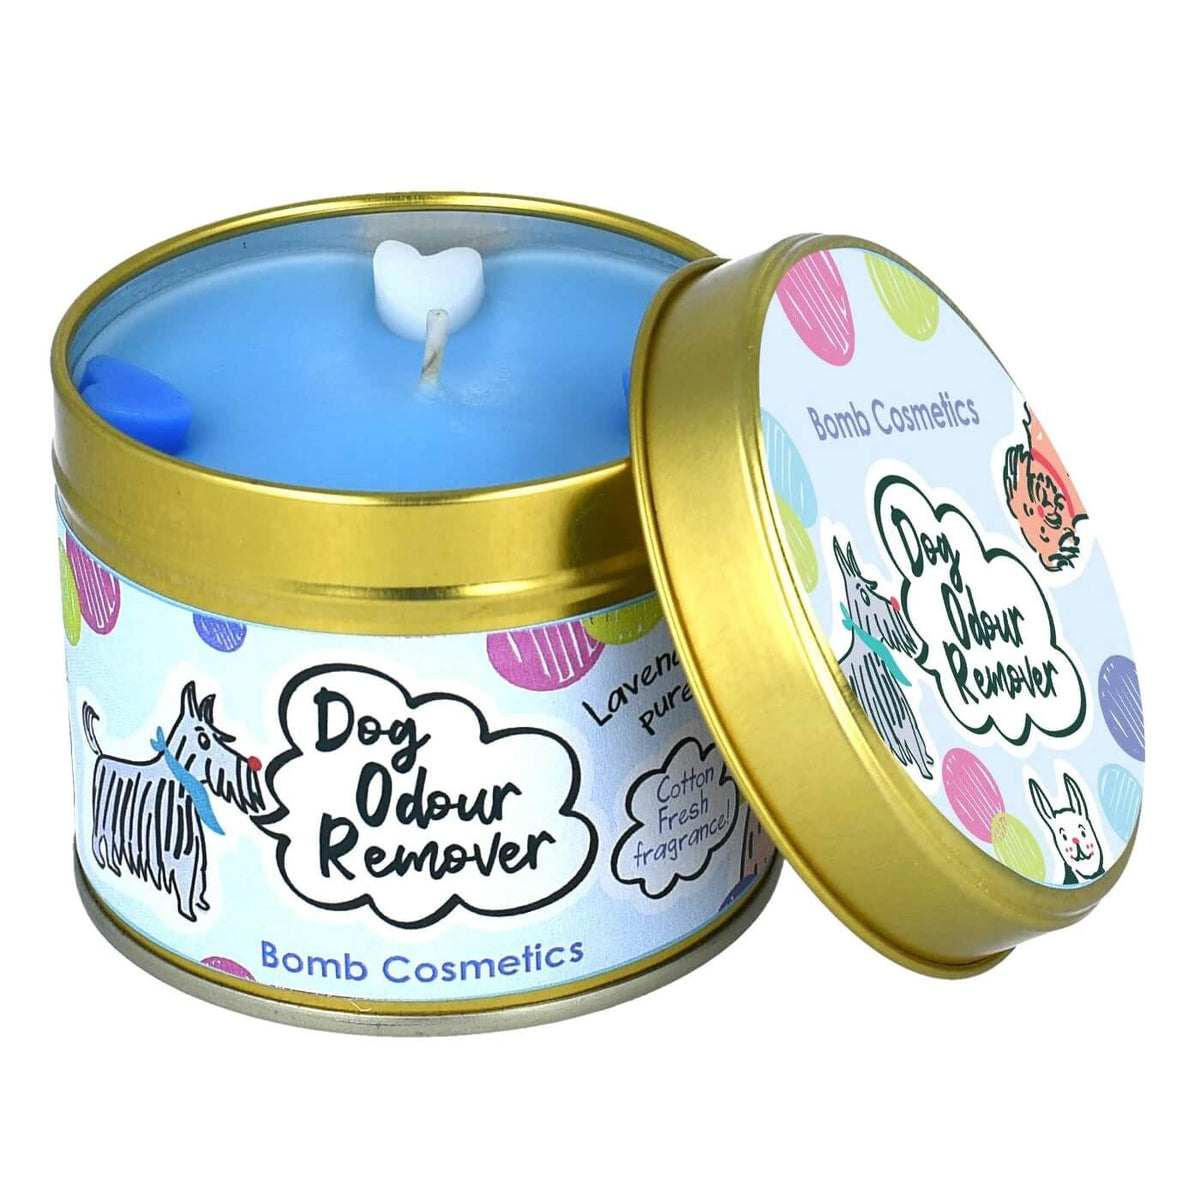 Dog Odour Remover Candle | Bomb Cosmetics